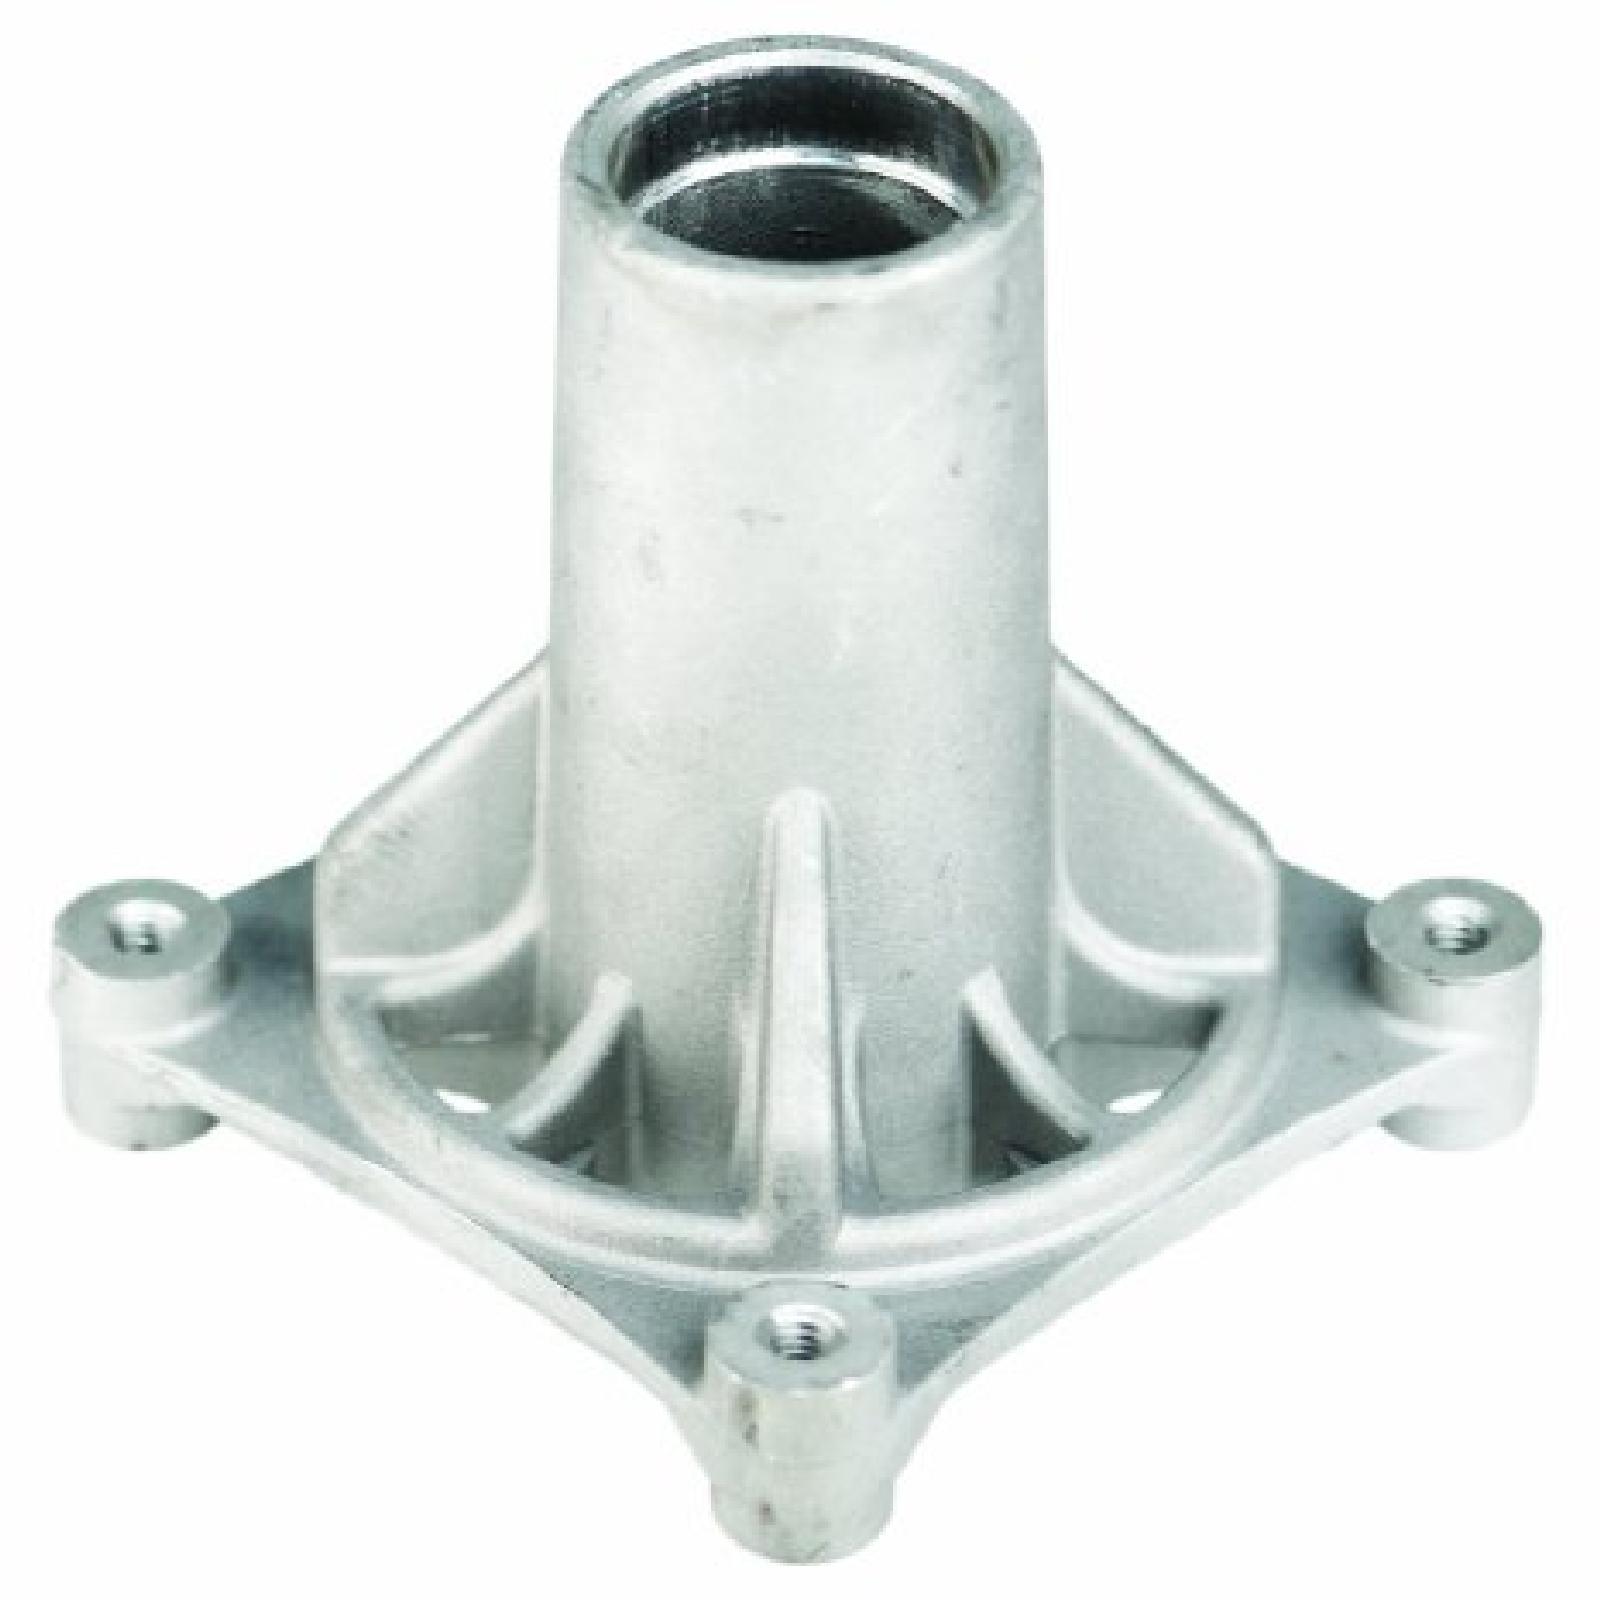 SPINDLE, HOUSING AYP 1872 part# 82-126 by Oregon